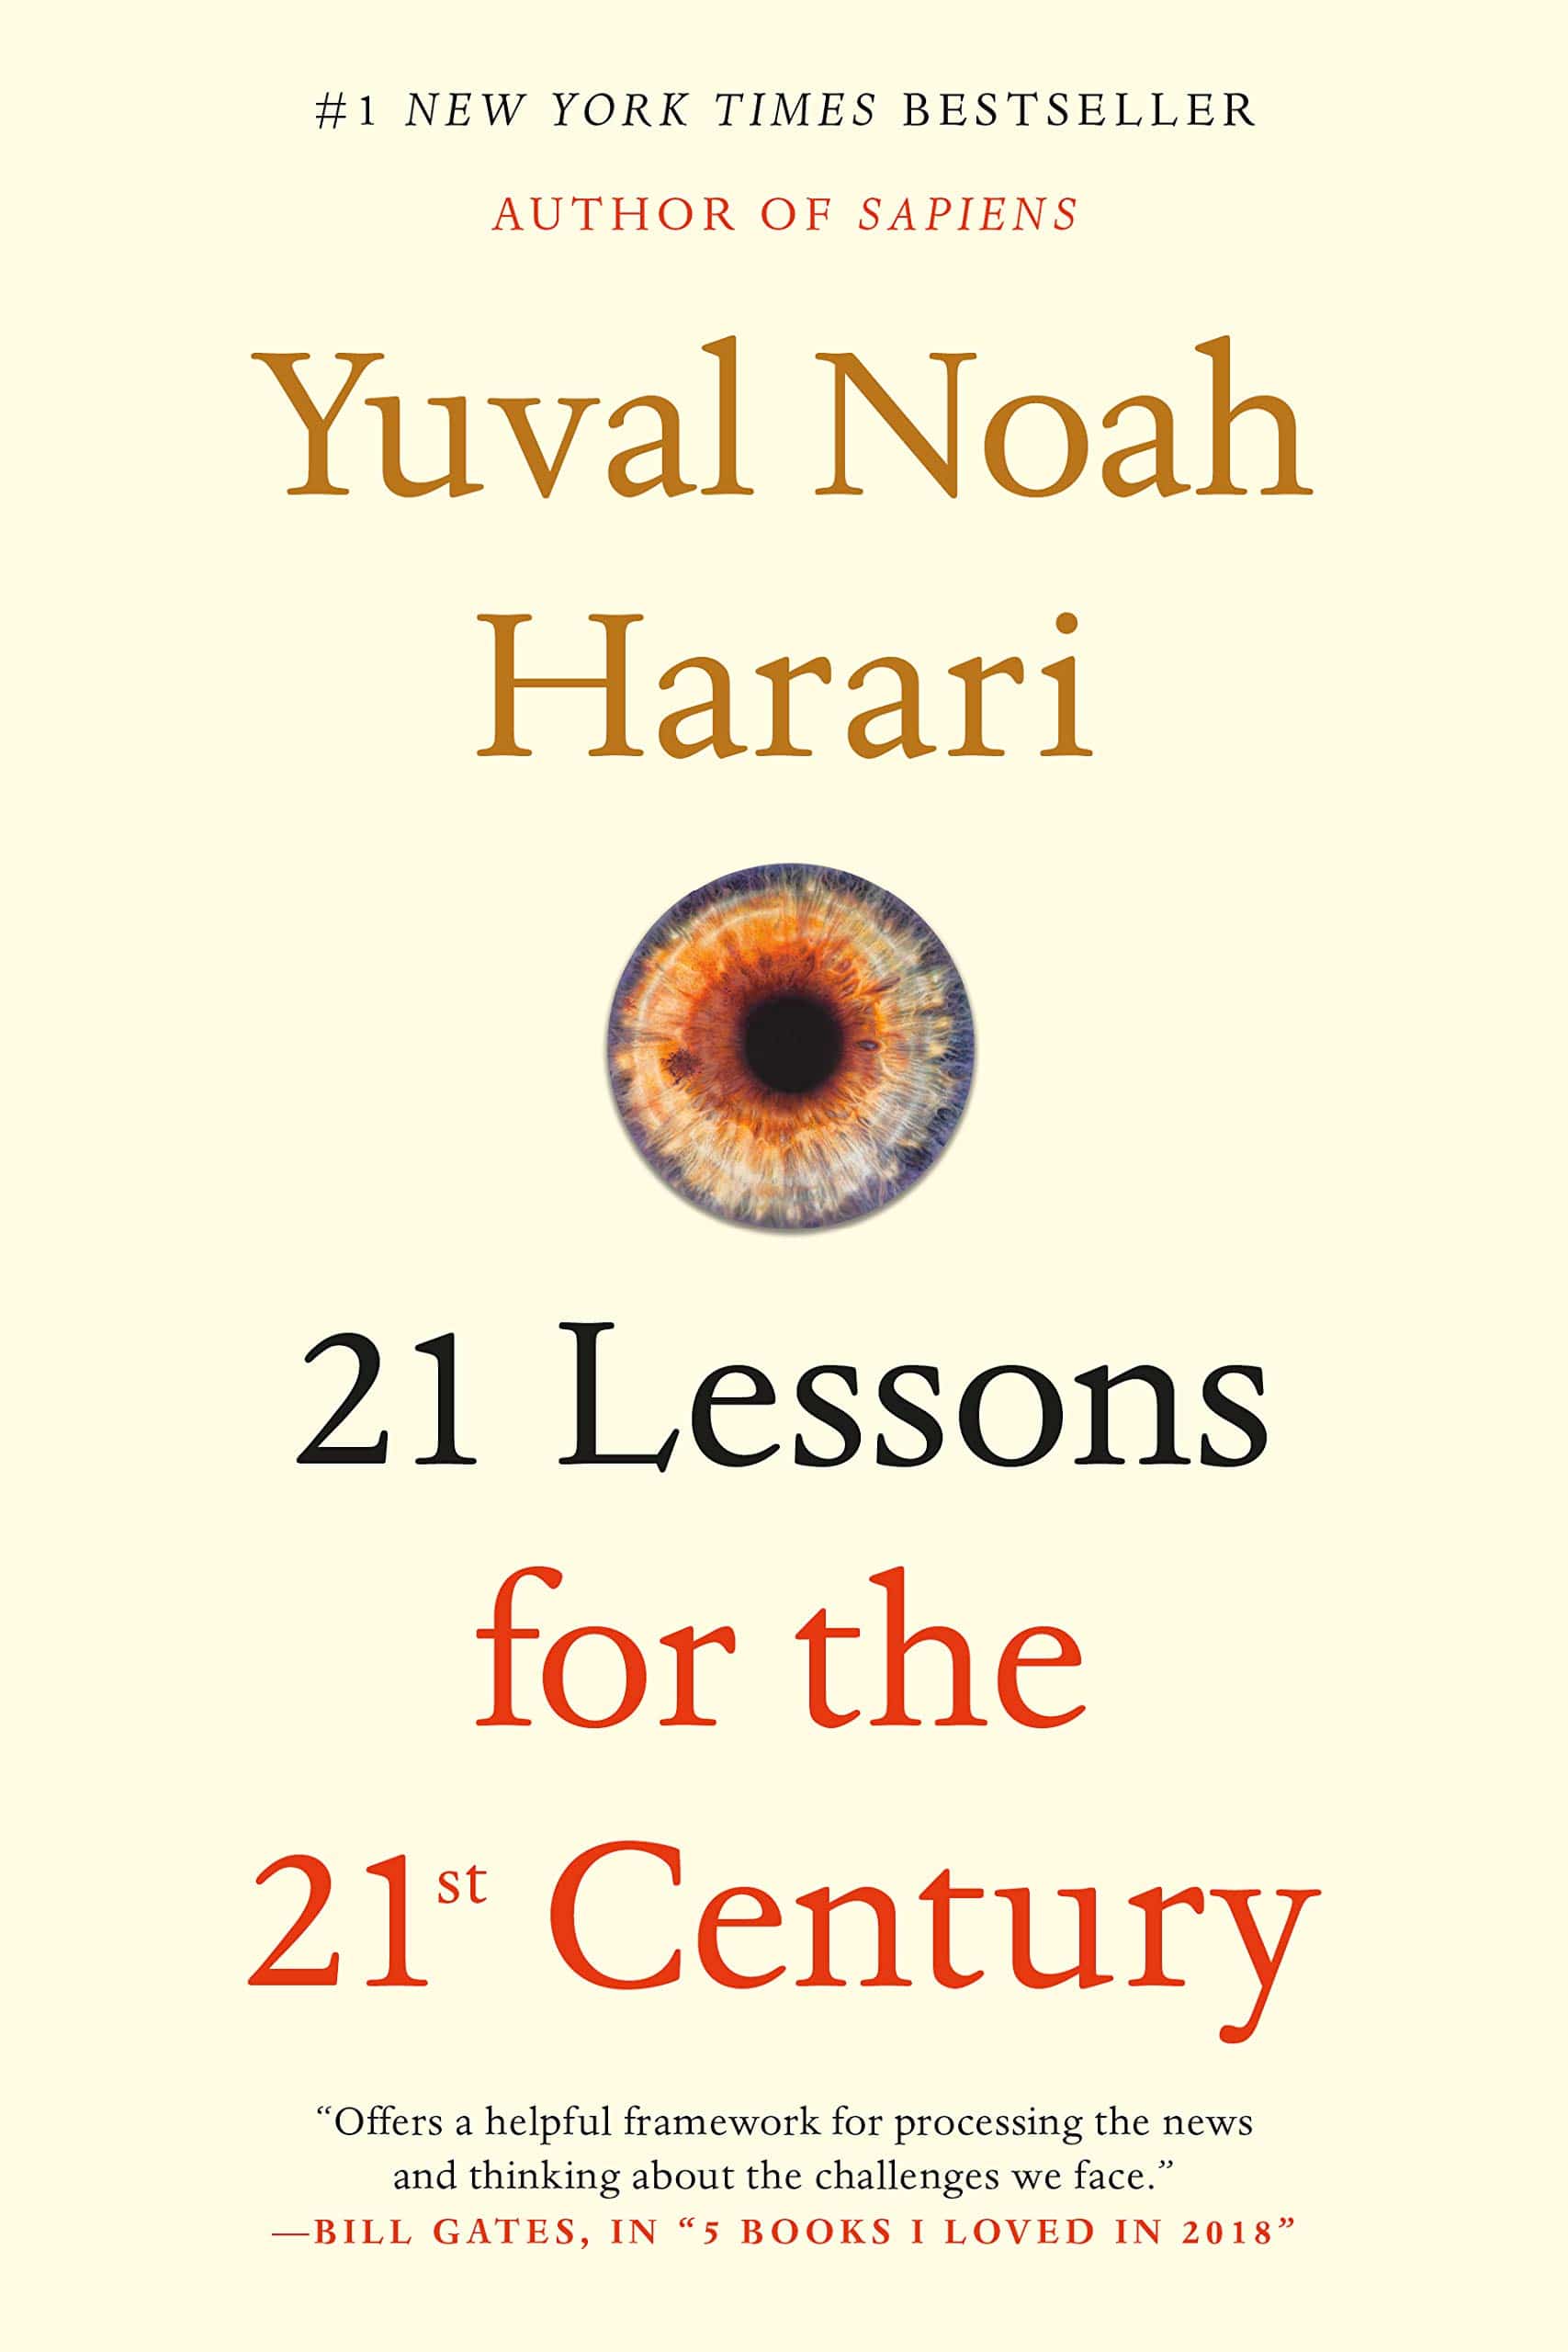 The cover of 21 Lessons for the 21st Century